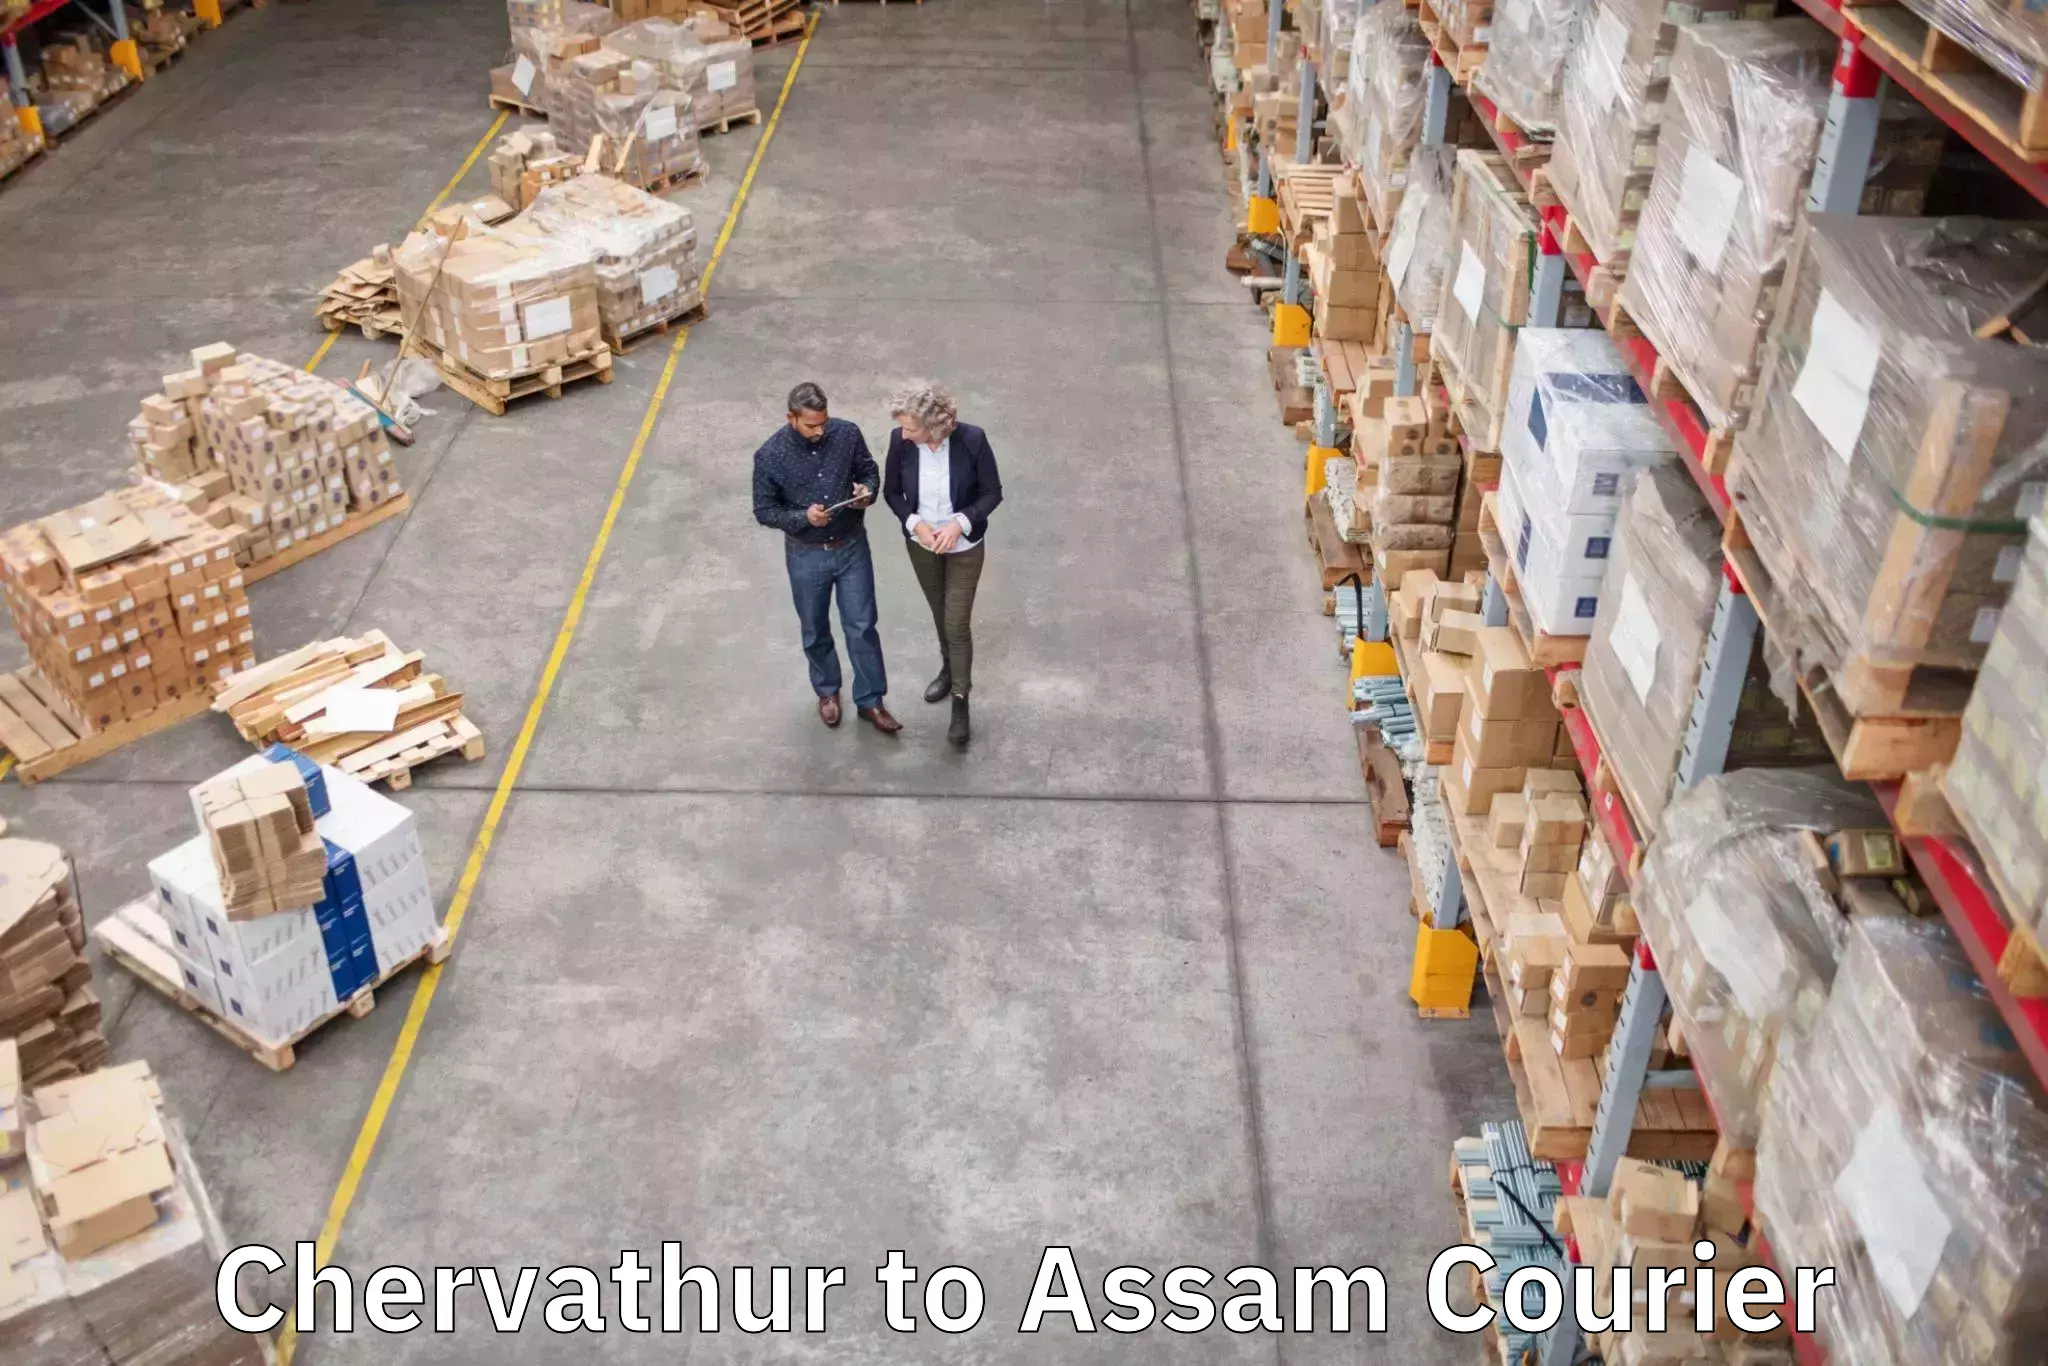 Luggage transport consulting Chervathur to Assam